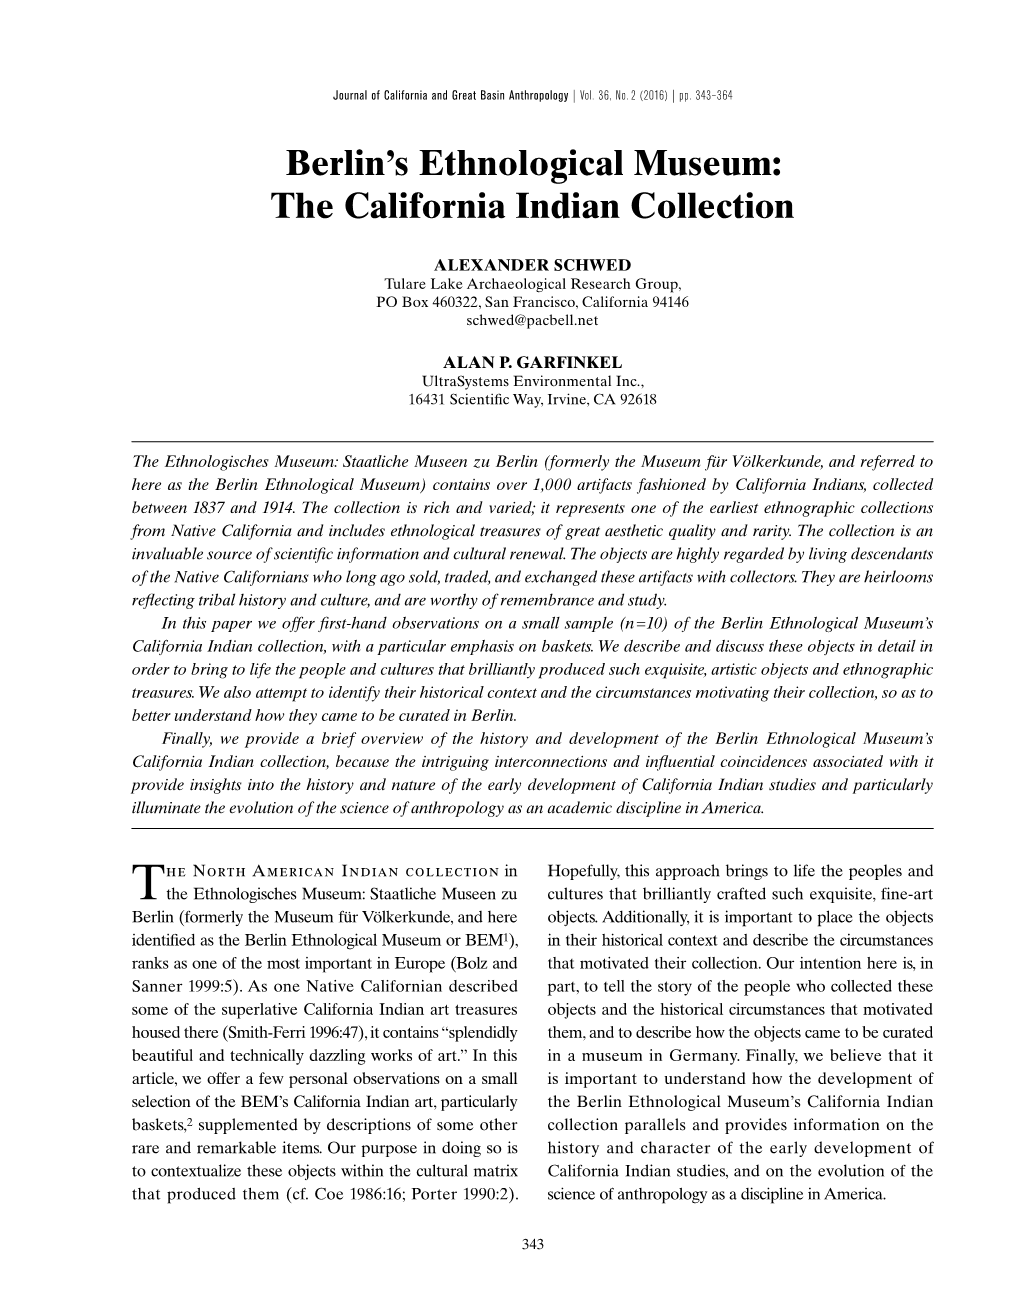 Berlin's Ethnological Museum: the California Indian Collection